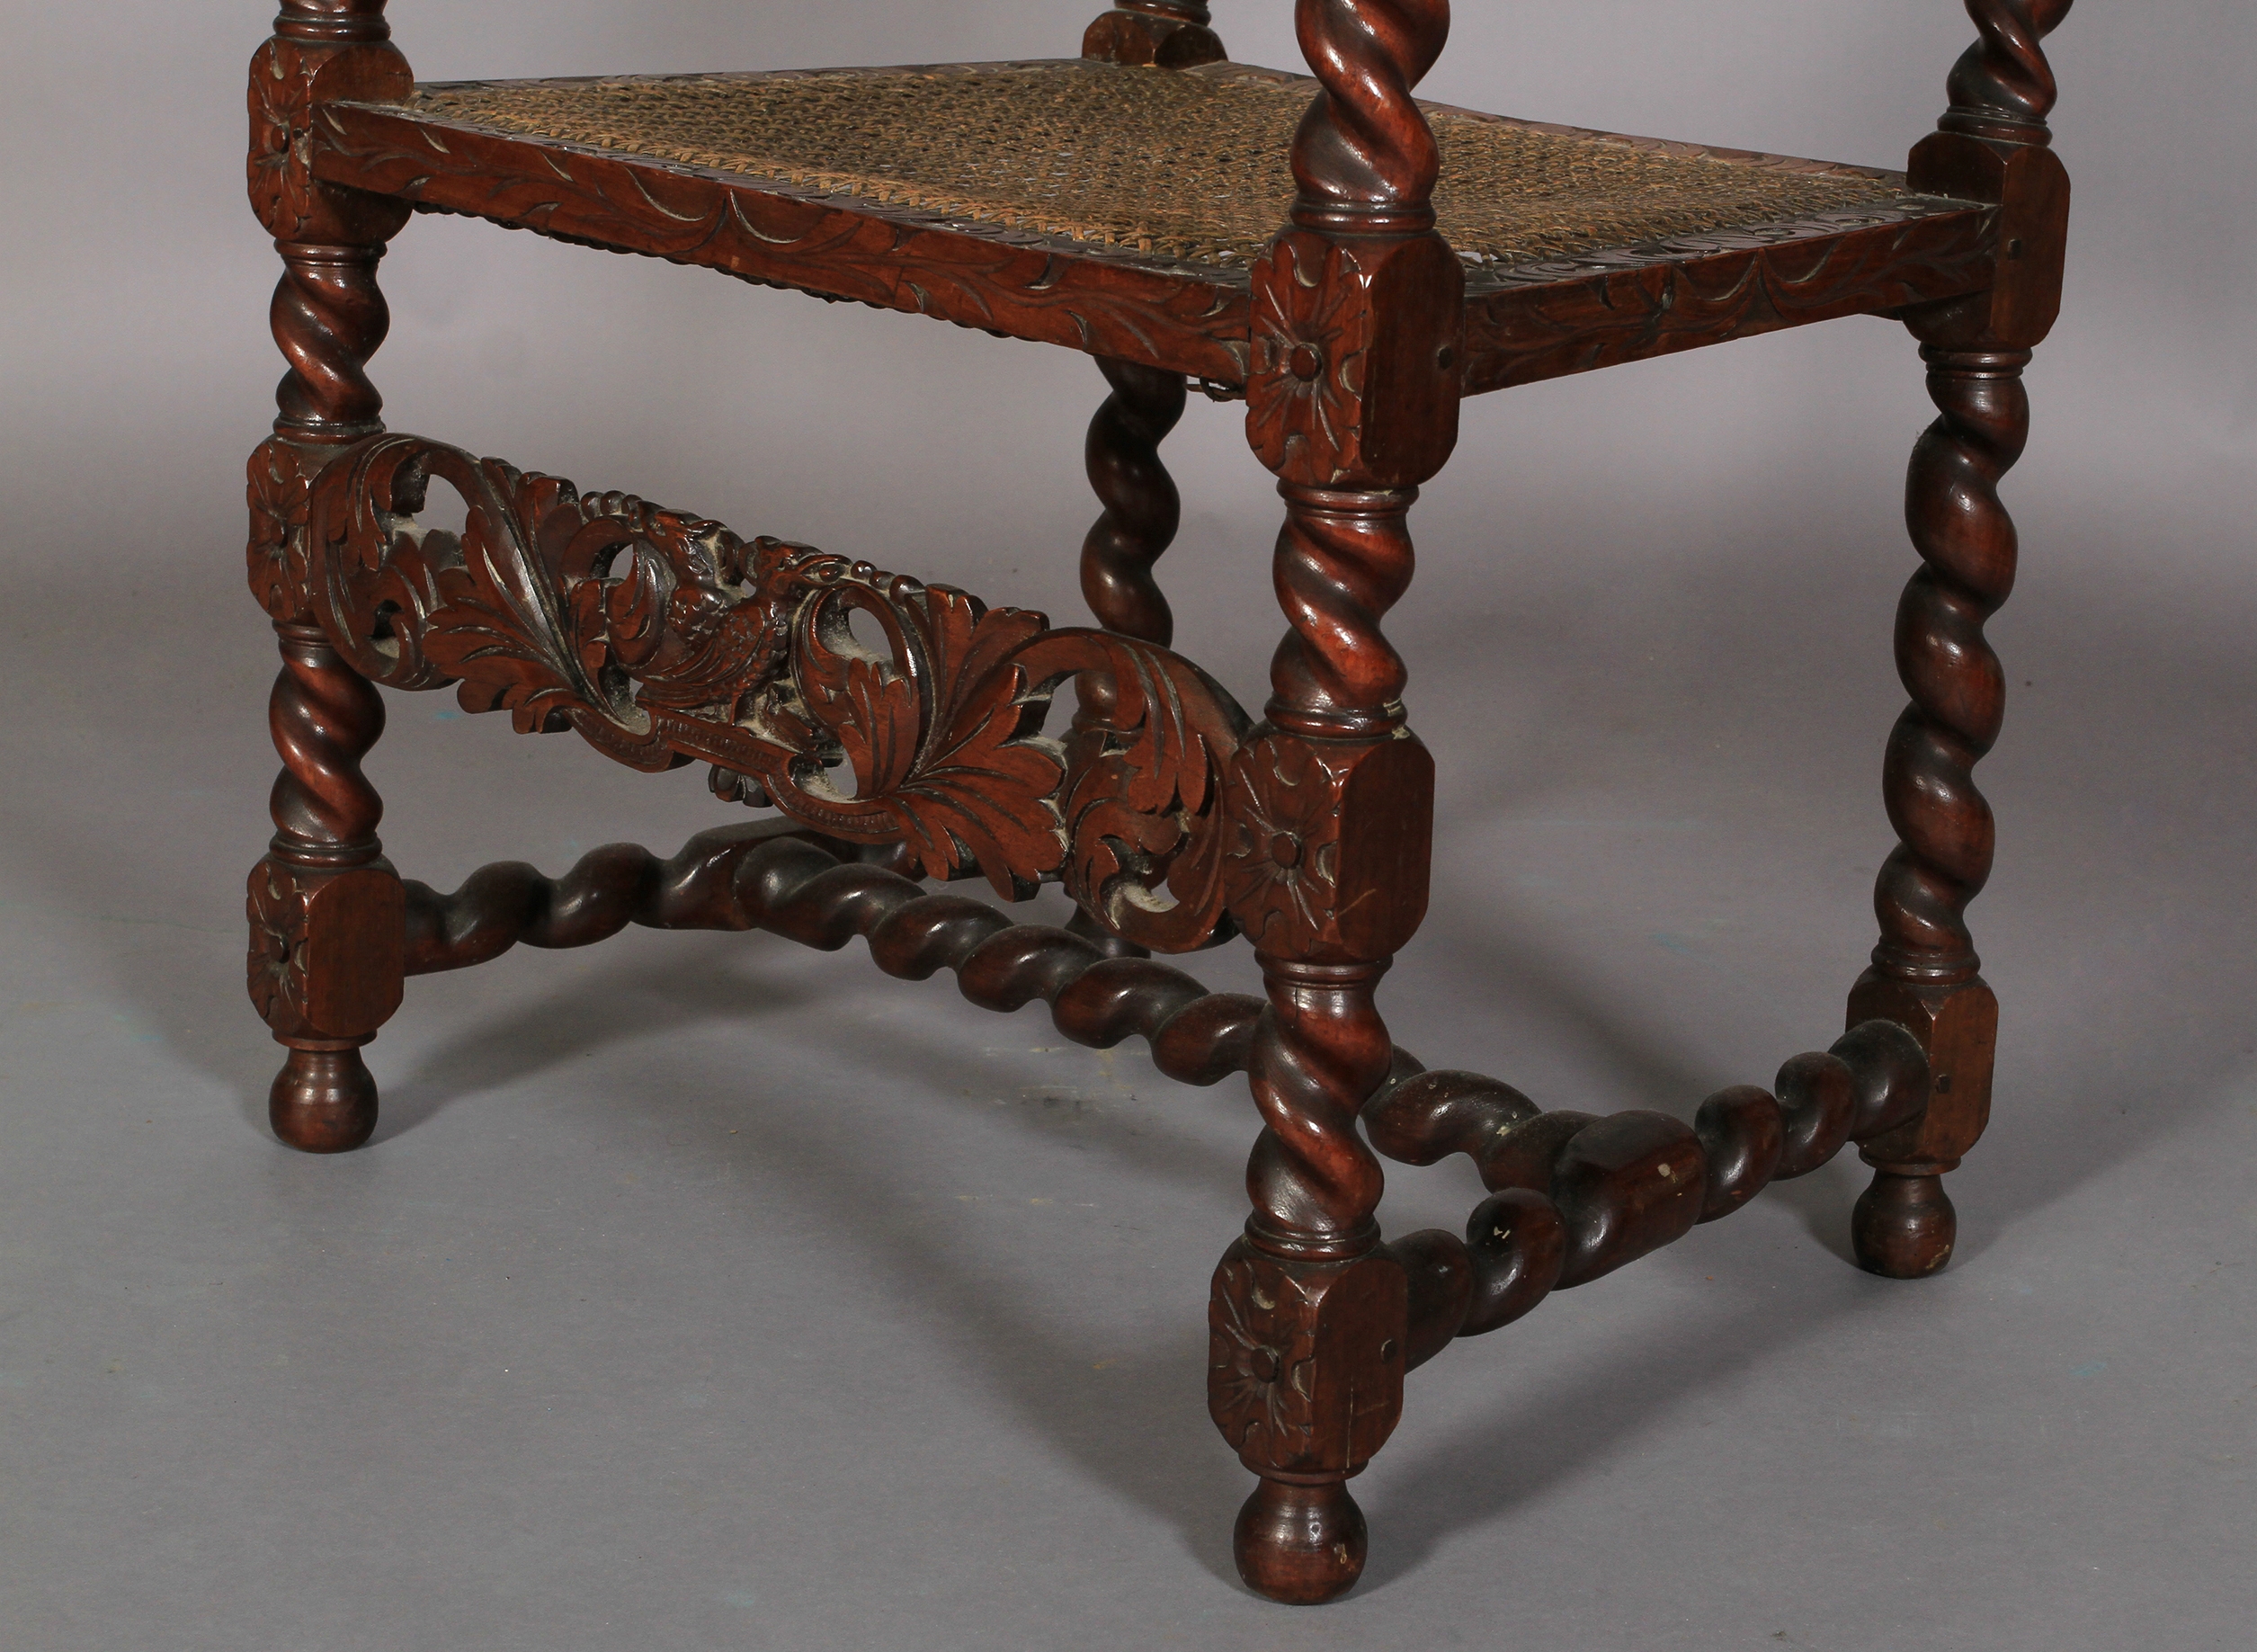 A Charles II style walnut armchair 19th century, having a pierced cresting carved with pair of birds - Image 4 of 4